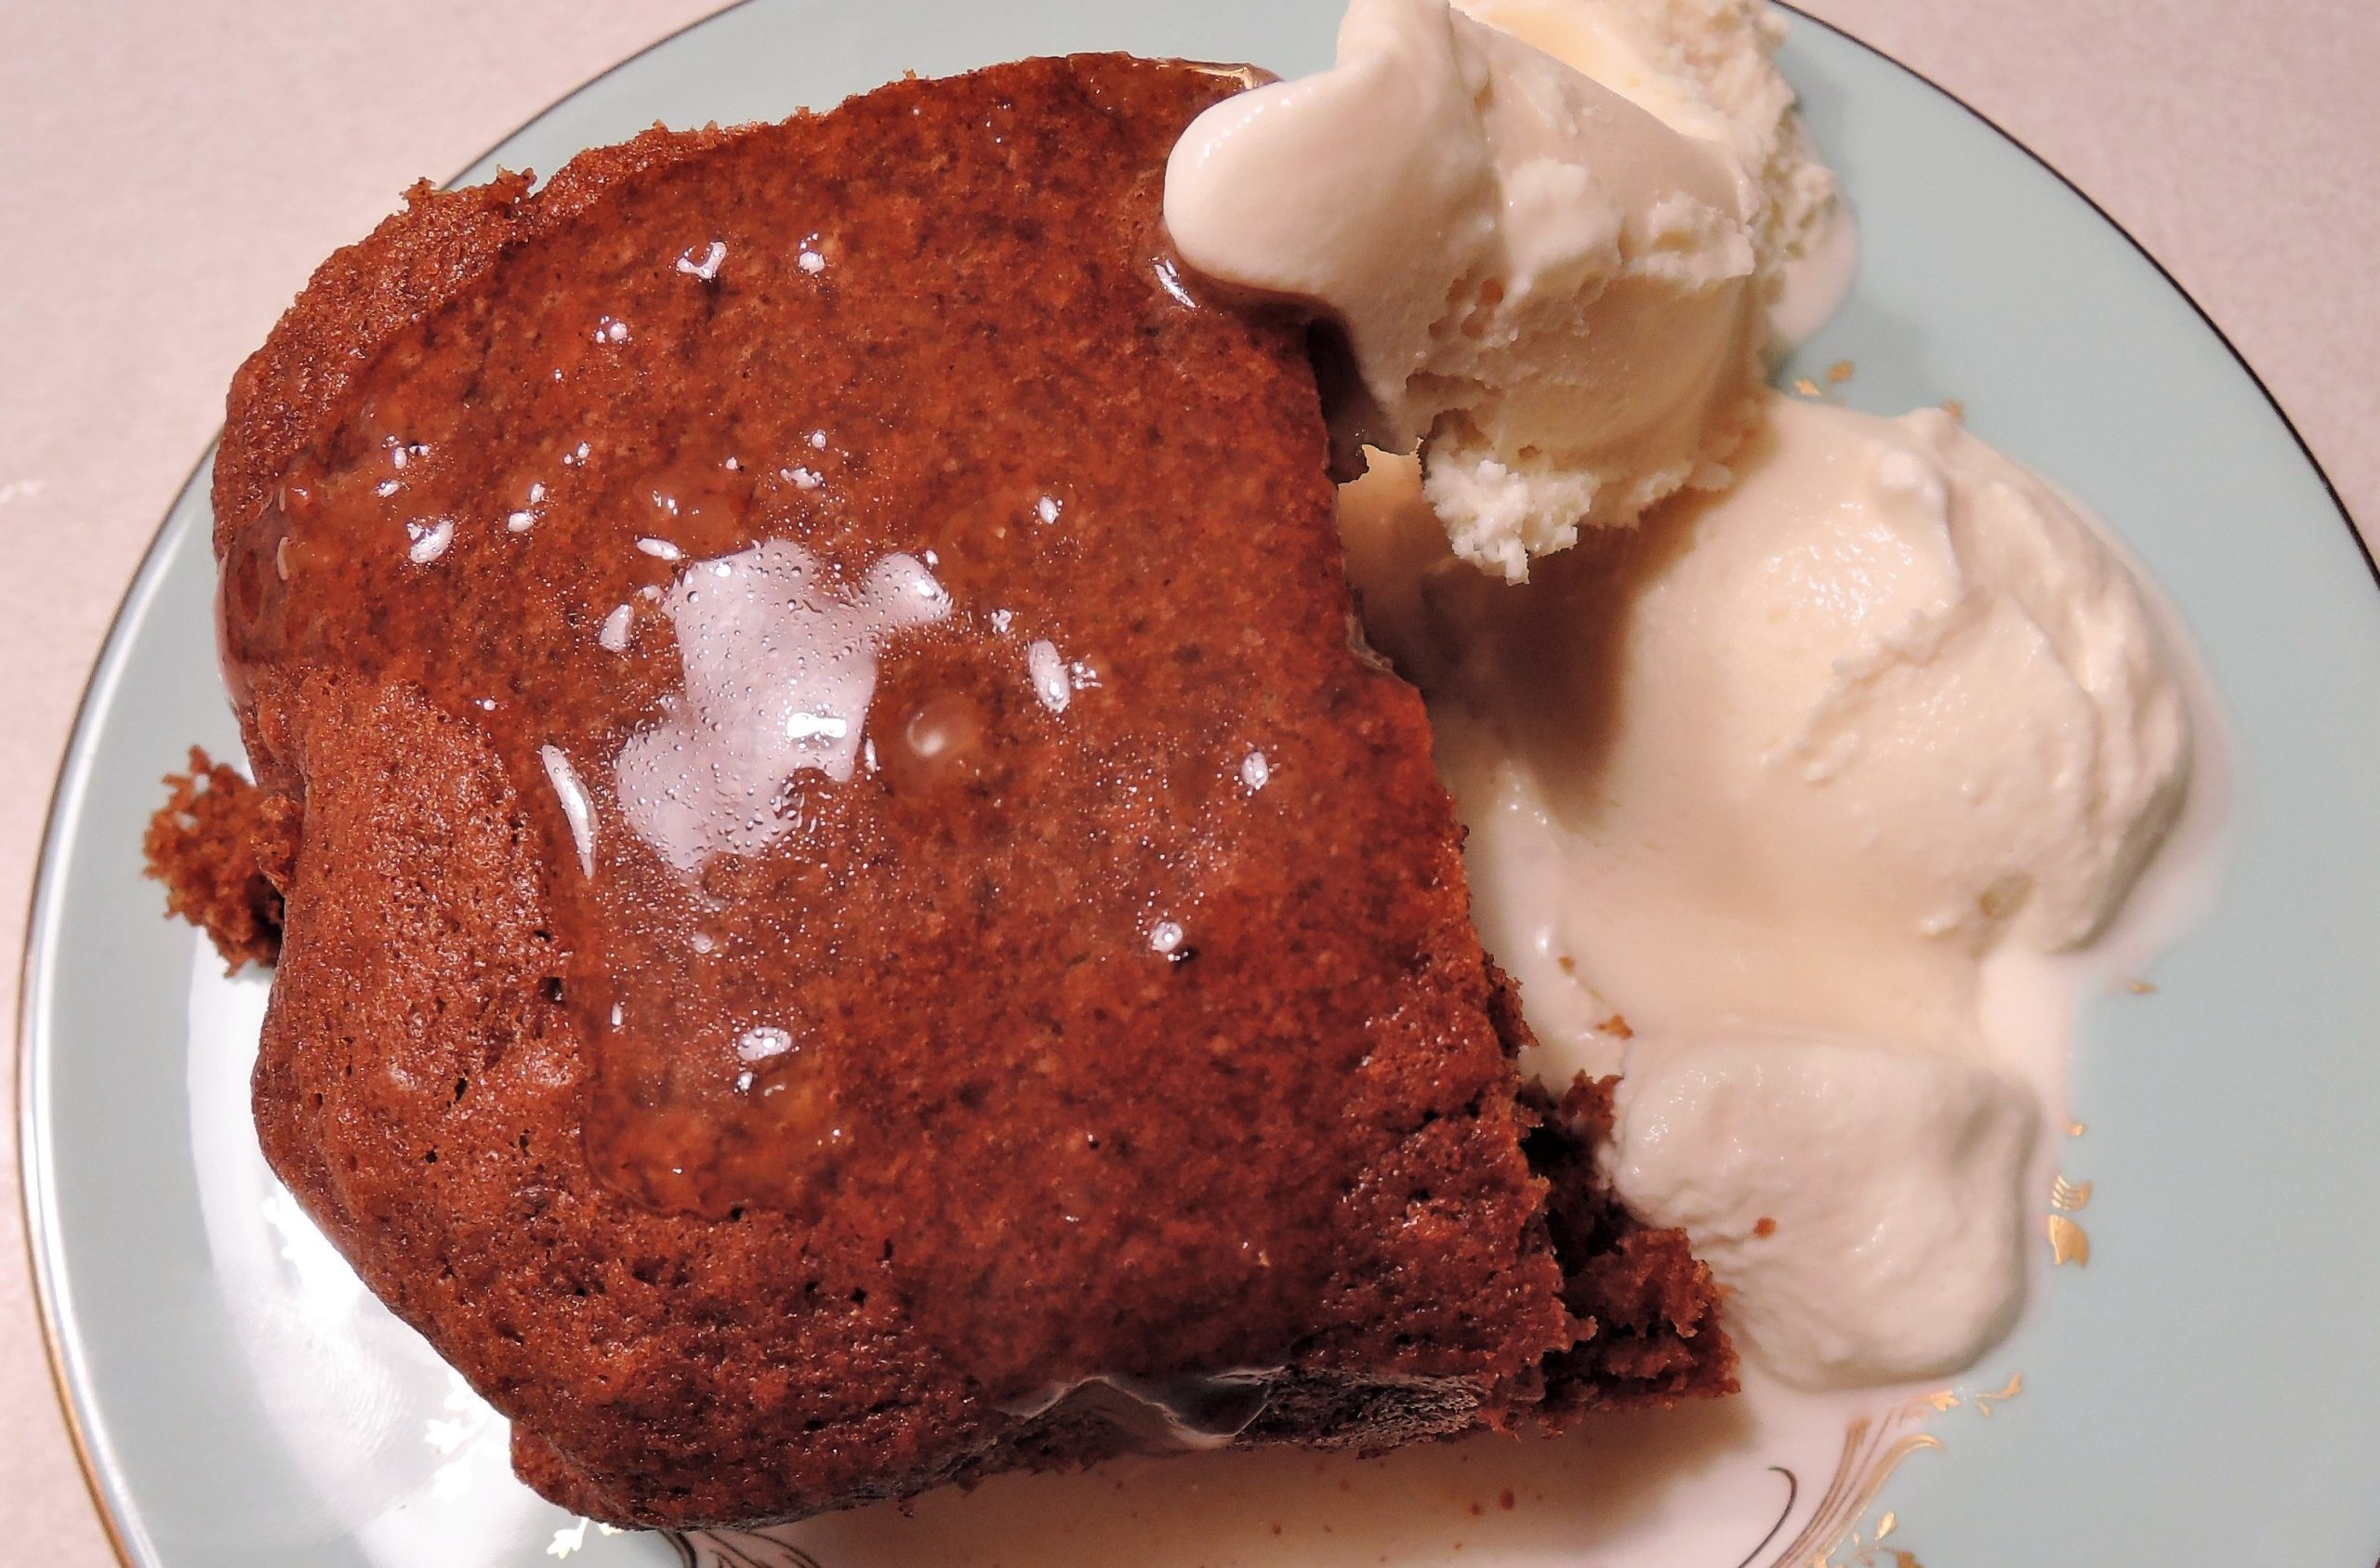 Gingerbread Cake with Spiced Lemon Sauce